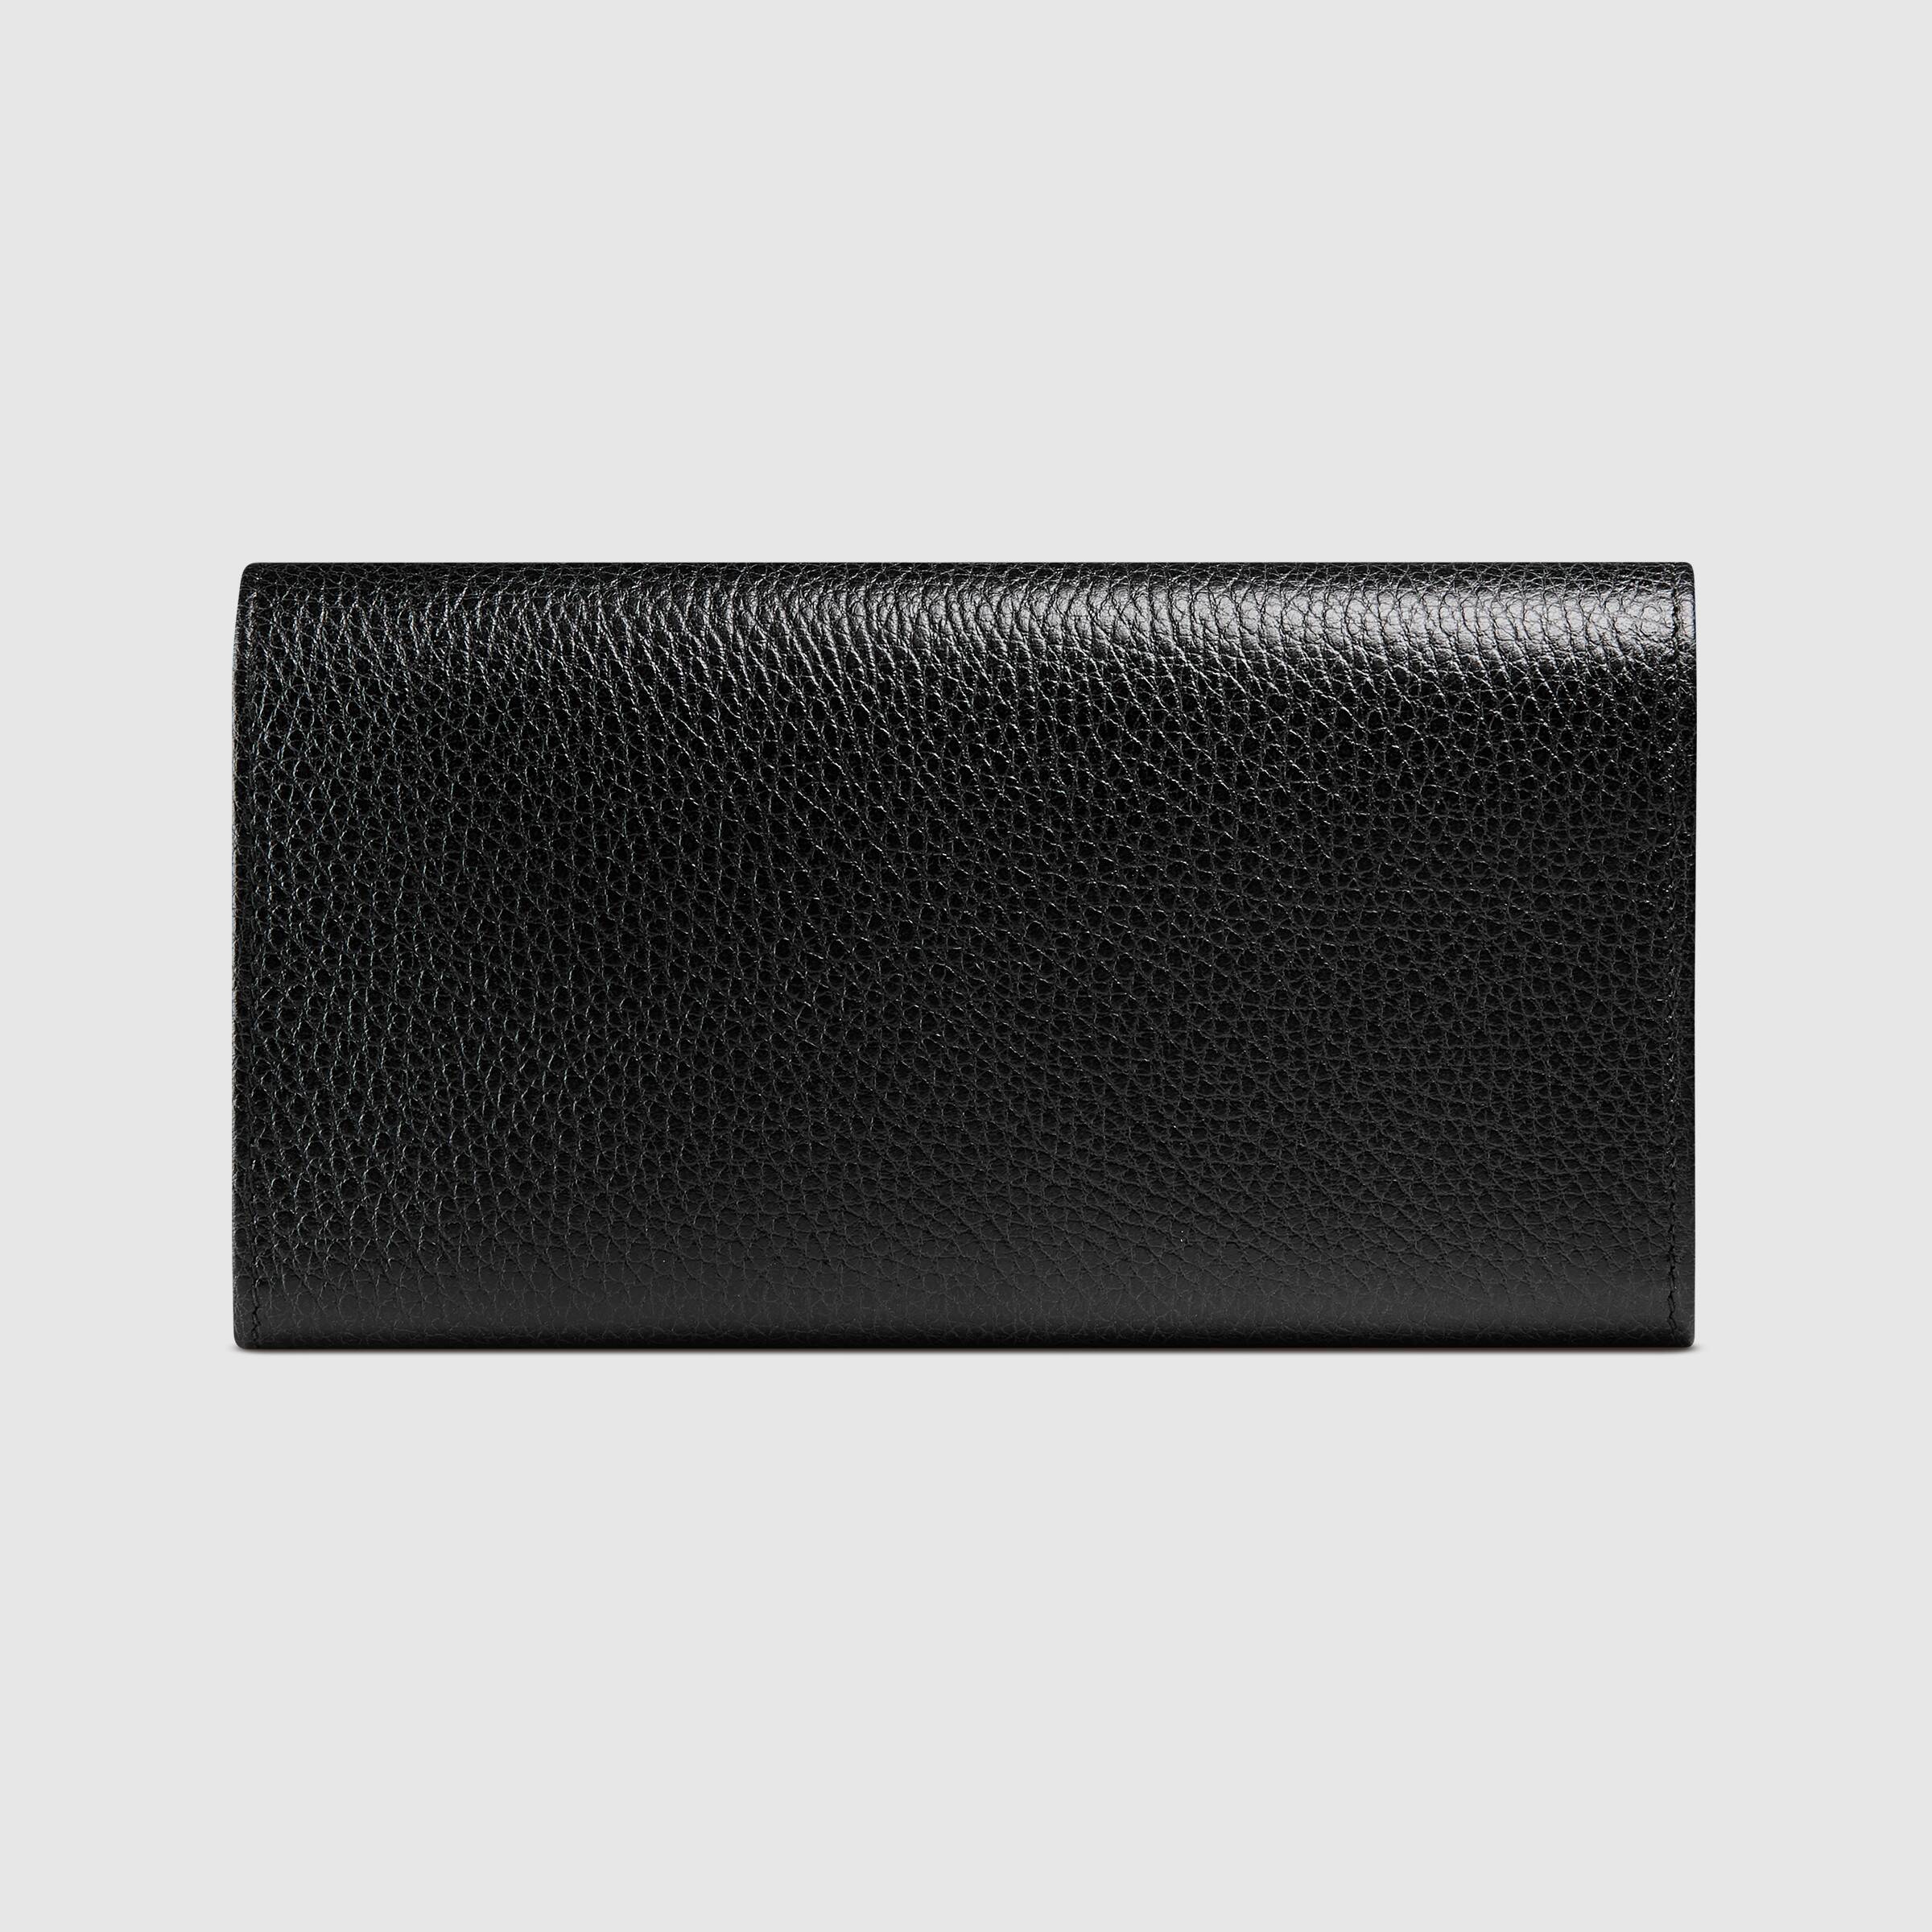 Gucci GG Leather Continental Wallet Black